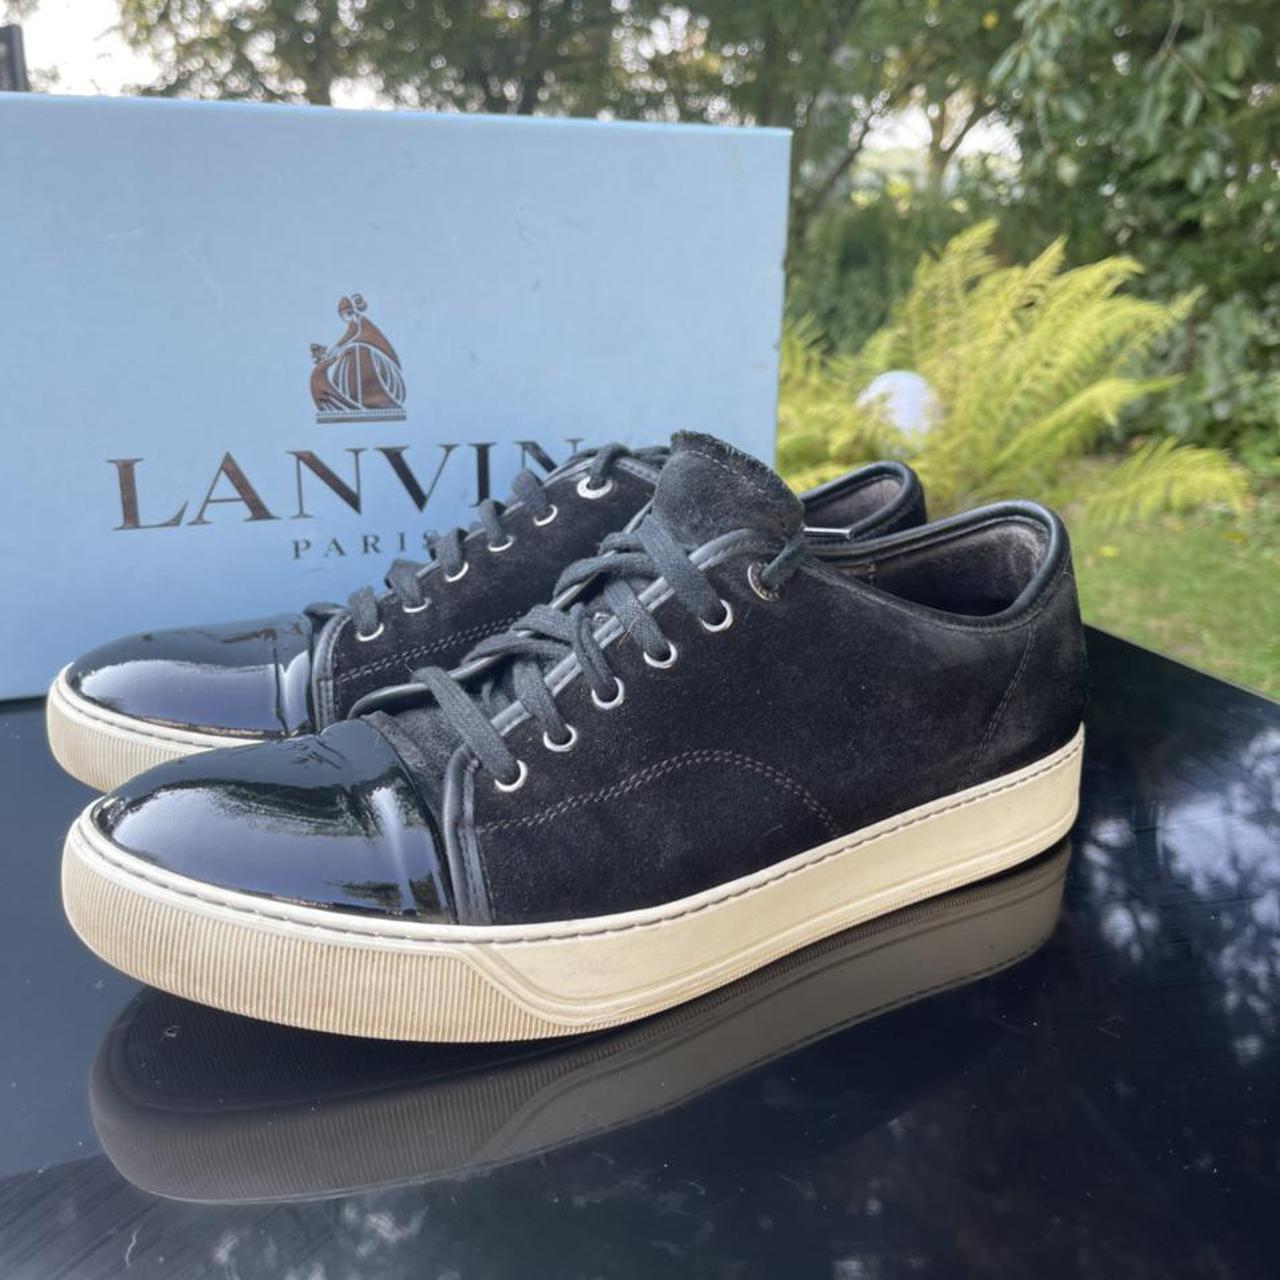 Product Image 1 - Authentic Lanvin classic sneaker RRP